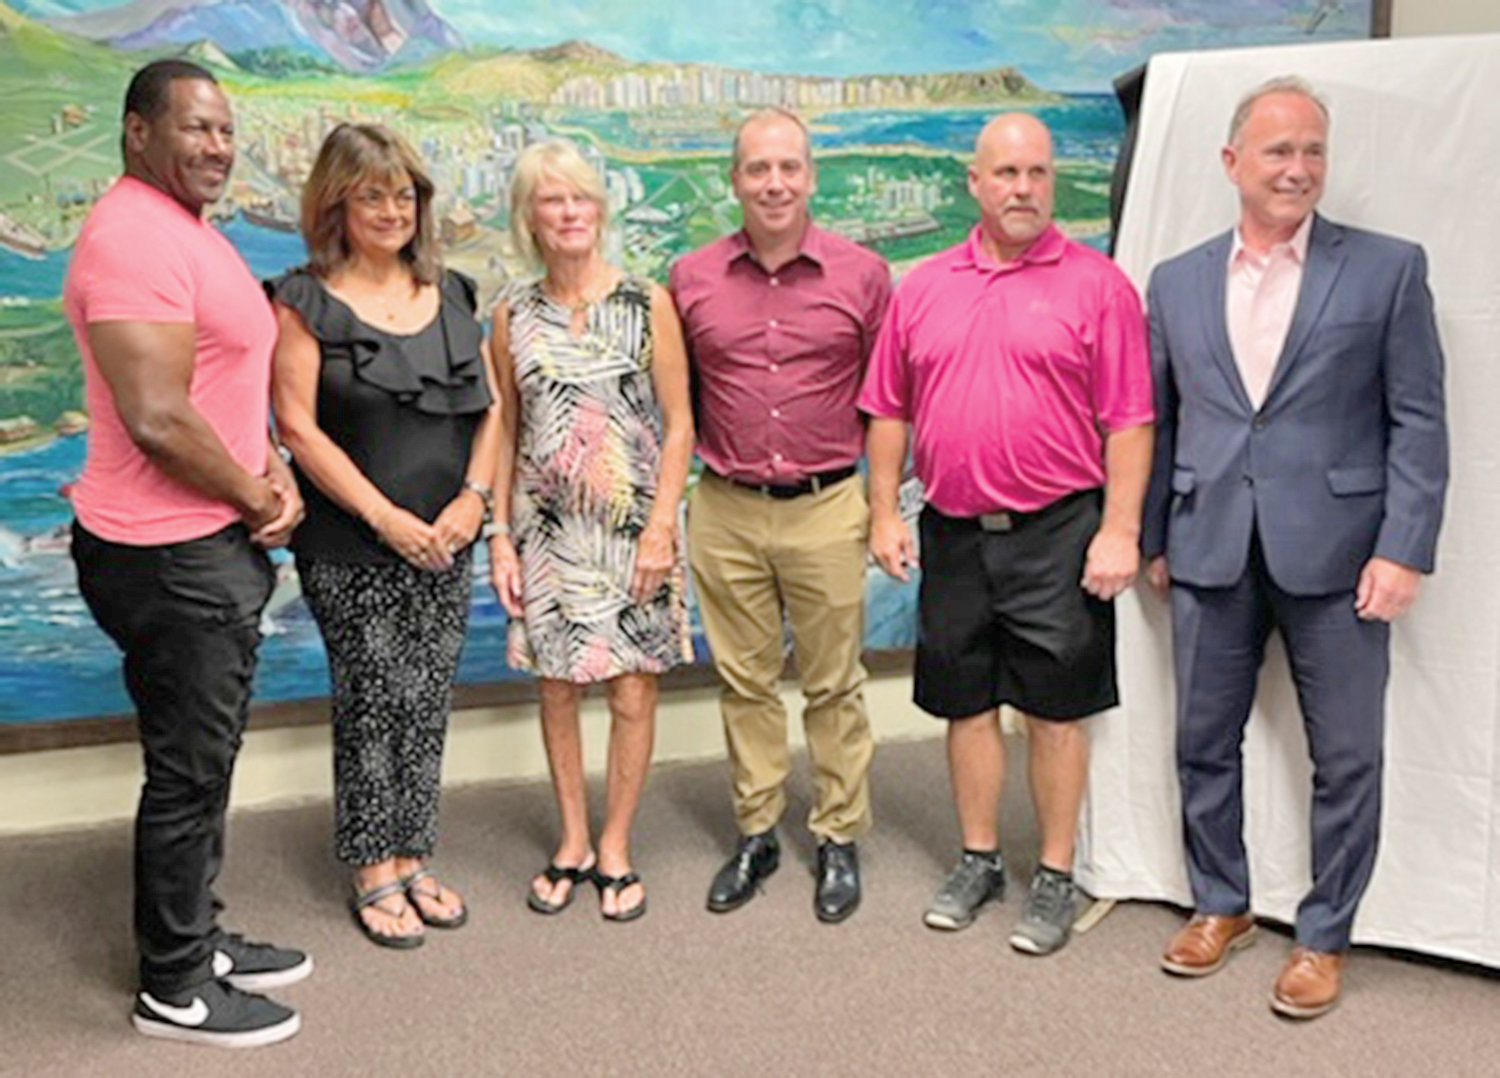 CLASS OF 2020 — Rome Sports Hall of Fame Class of 2020 inductees and the family members who represented them pose for a photo at the induction ceremony on Sunday. From left: Calvin Griggs; Mary Orbinati Murphy, daughter of Michael J. Orbinati; Phyllis Niemi; Brendan Ryan, son of Joseph A. Ryan Jr.; JR Purrington and Randy J. Williams.